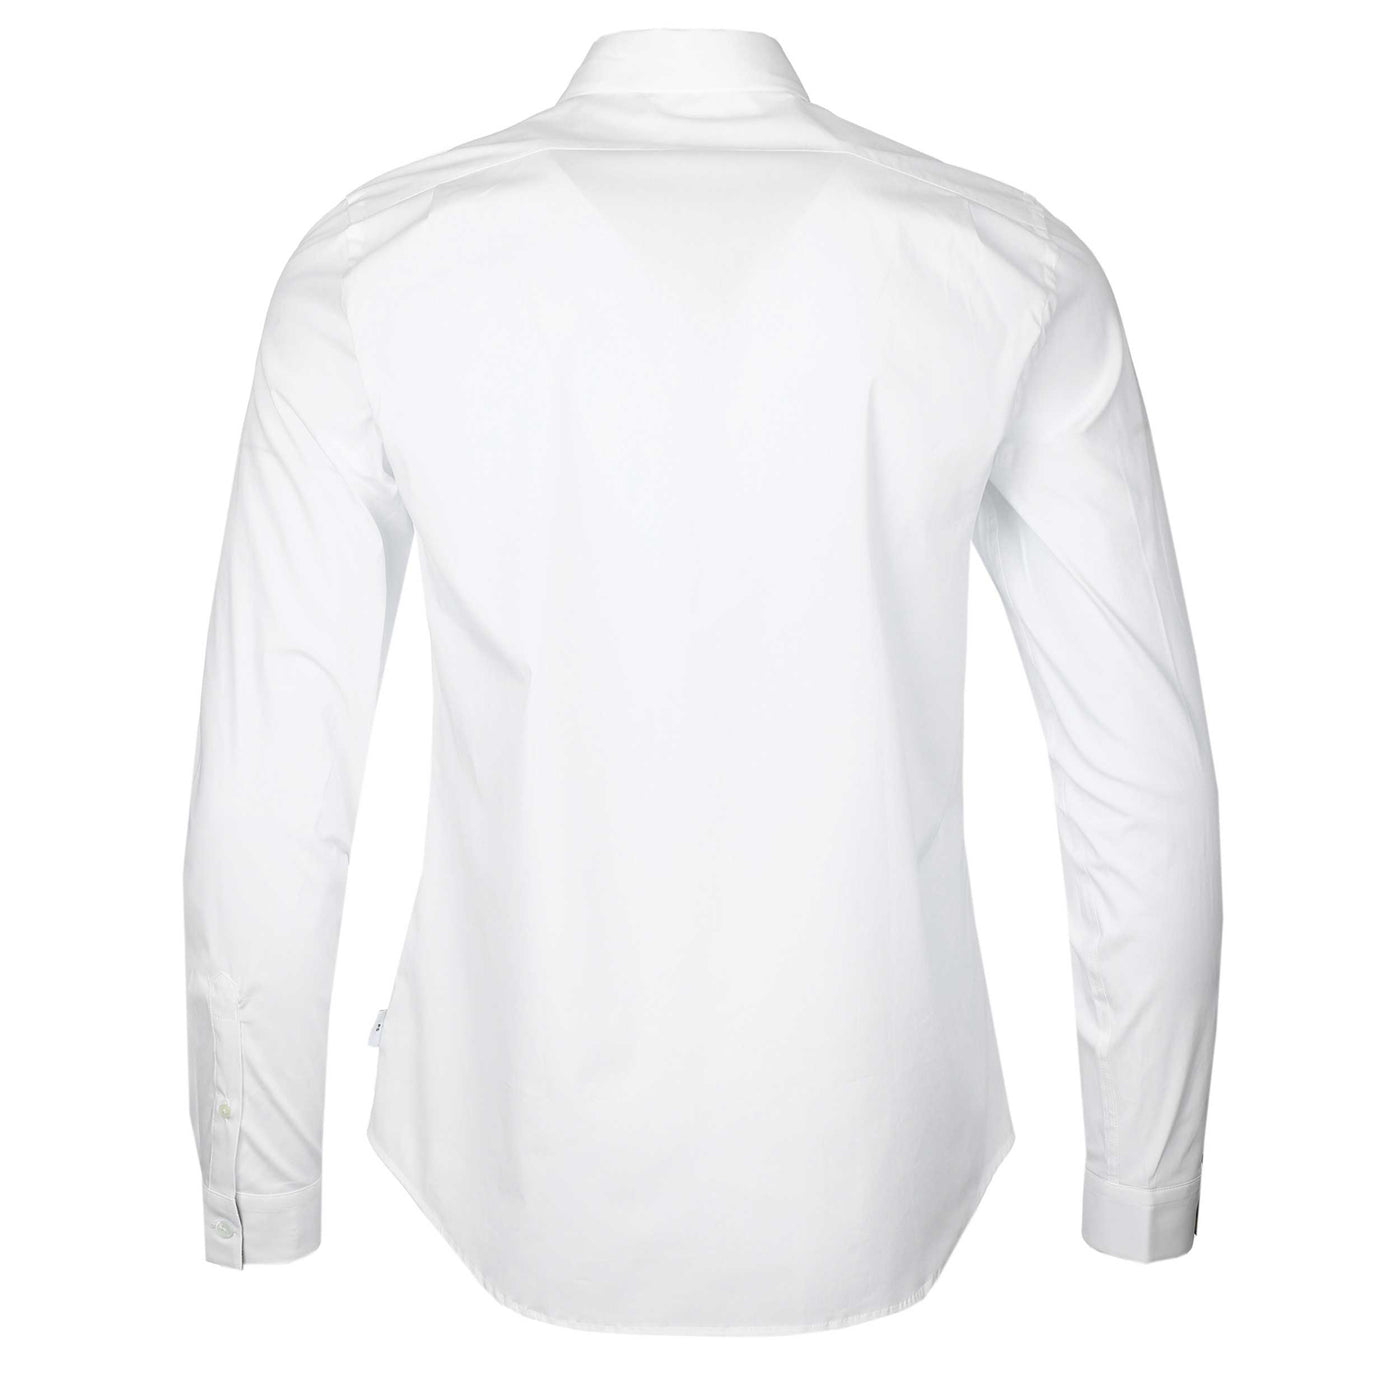 Paul Smith Tailored Fit Shirt in White Back